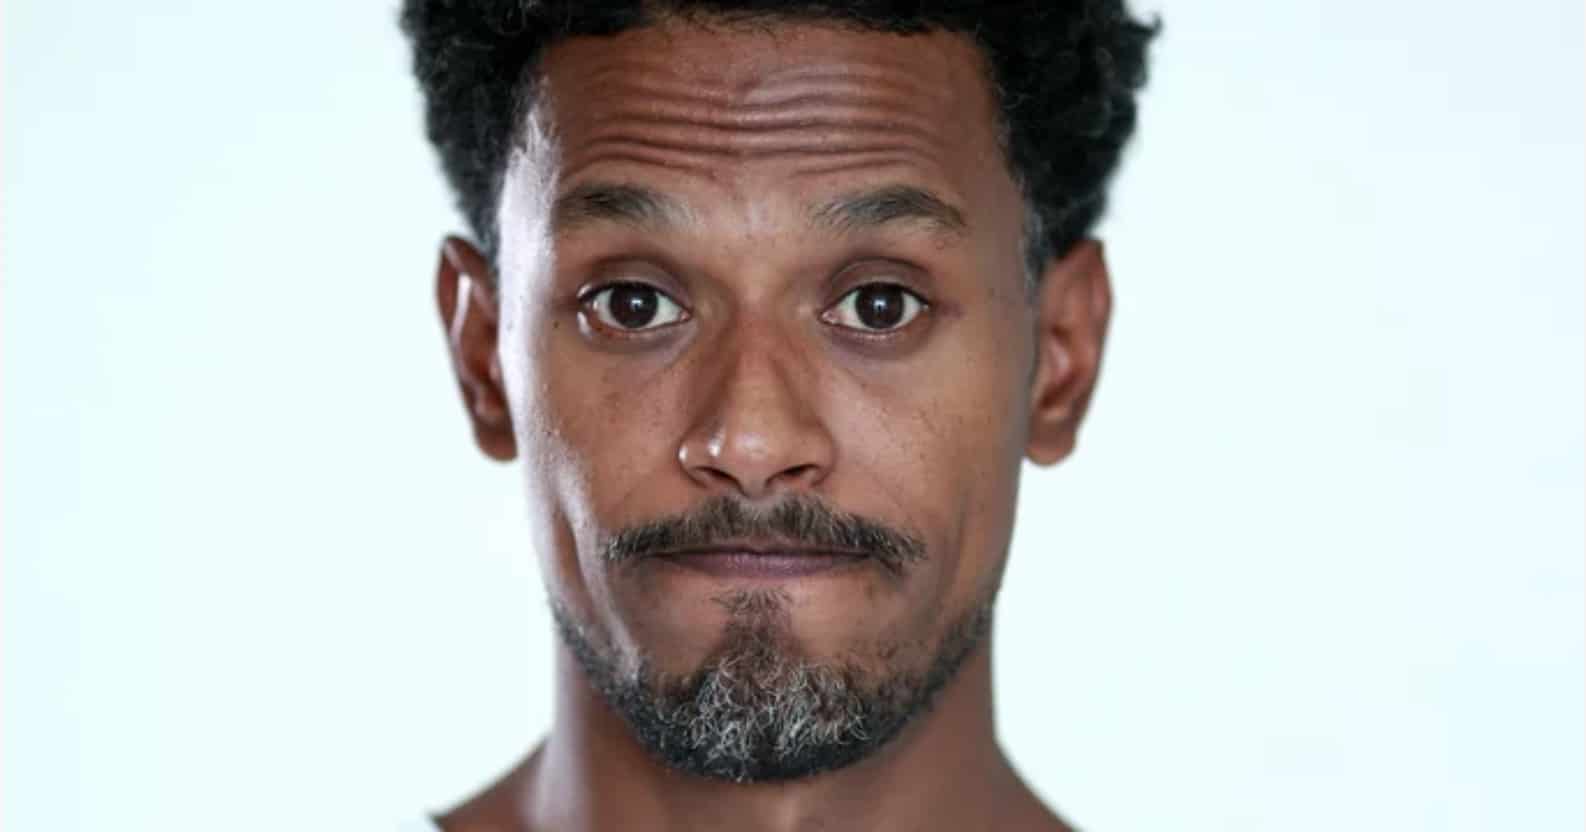 A Black man with an expression that could be read any number of ways, much like the layered findings that people think vegans think they’re better than everyone (and some vegans do…and so do non-vegans). Vegan's perceived self-righteousness is one of the main reasons given for why people "hate" vegans.